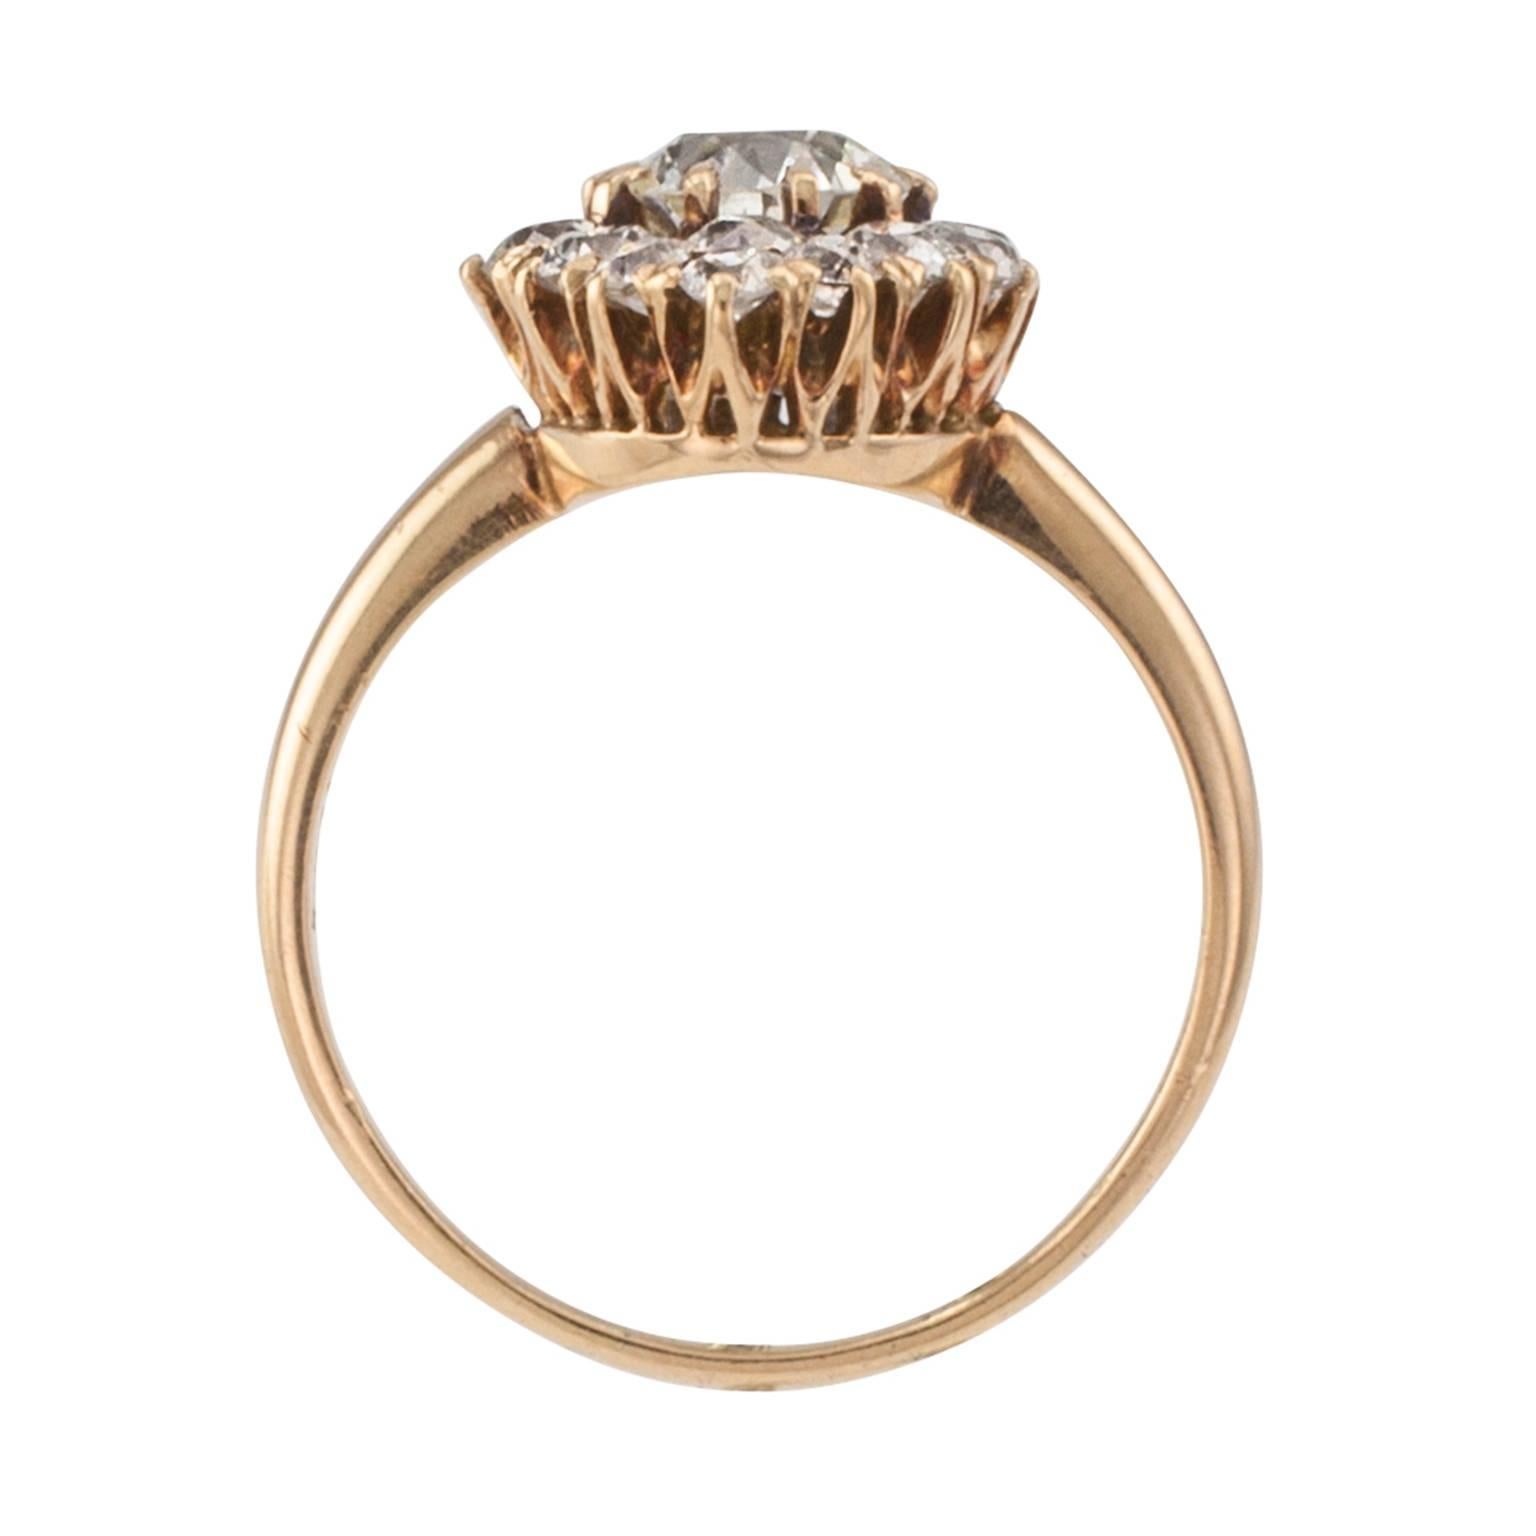 Victorian Diamond and Gold Ring

Navette-shaped ring entirely set with diamonds, large diamonds, as this one is,  represent wealth and power blatantly displayed with understated restrain and finesse.  Let's face it, these old diamonds have a very